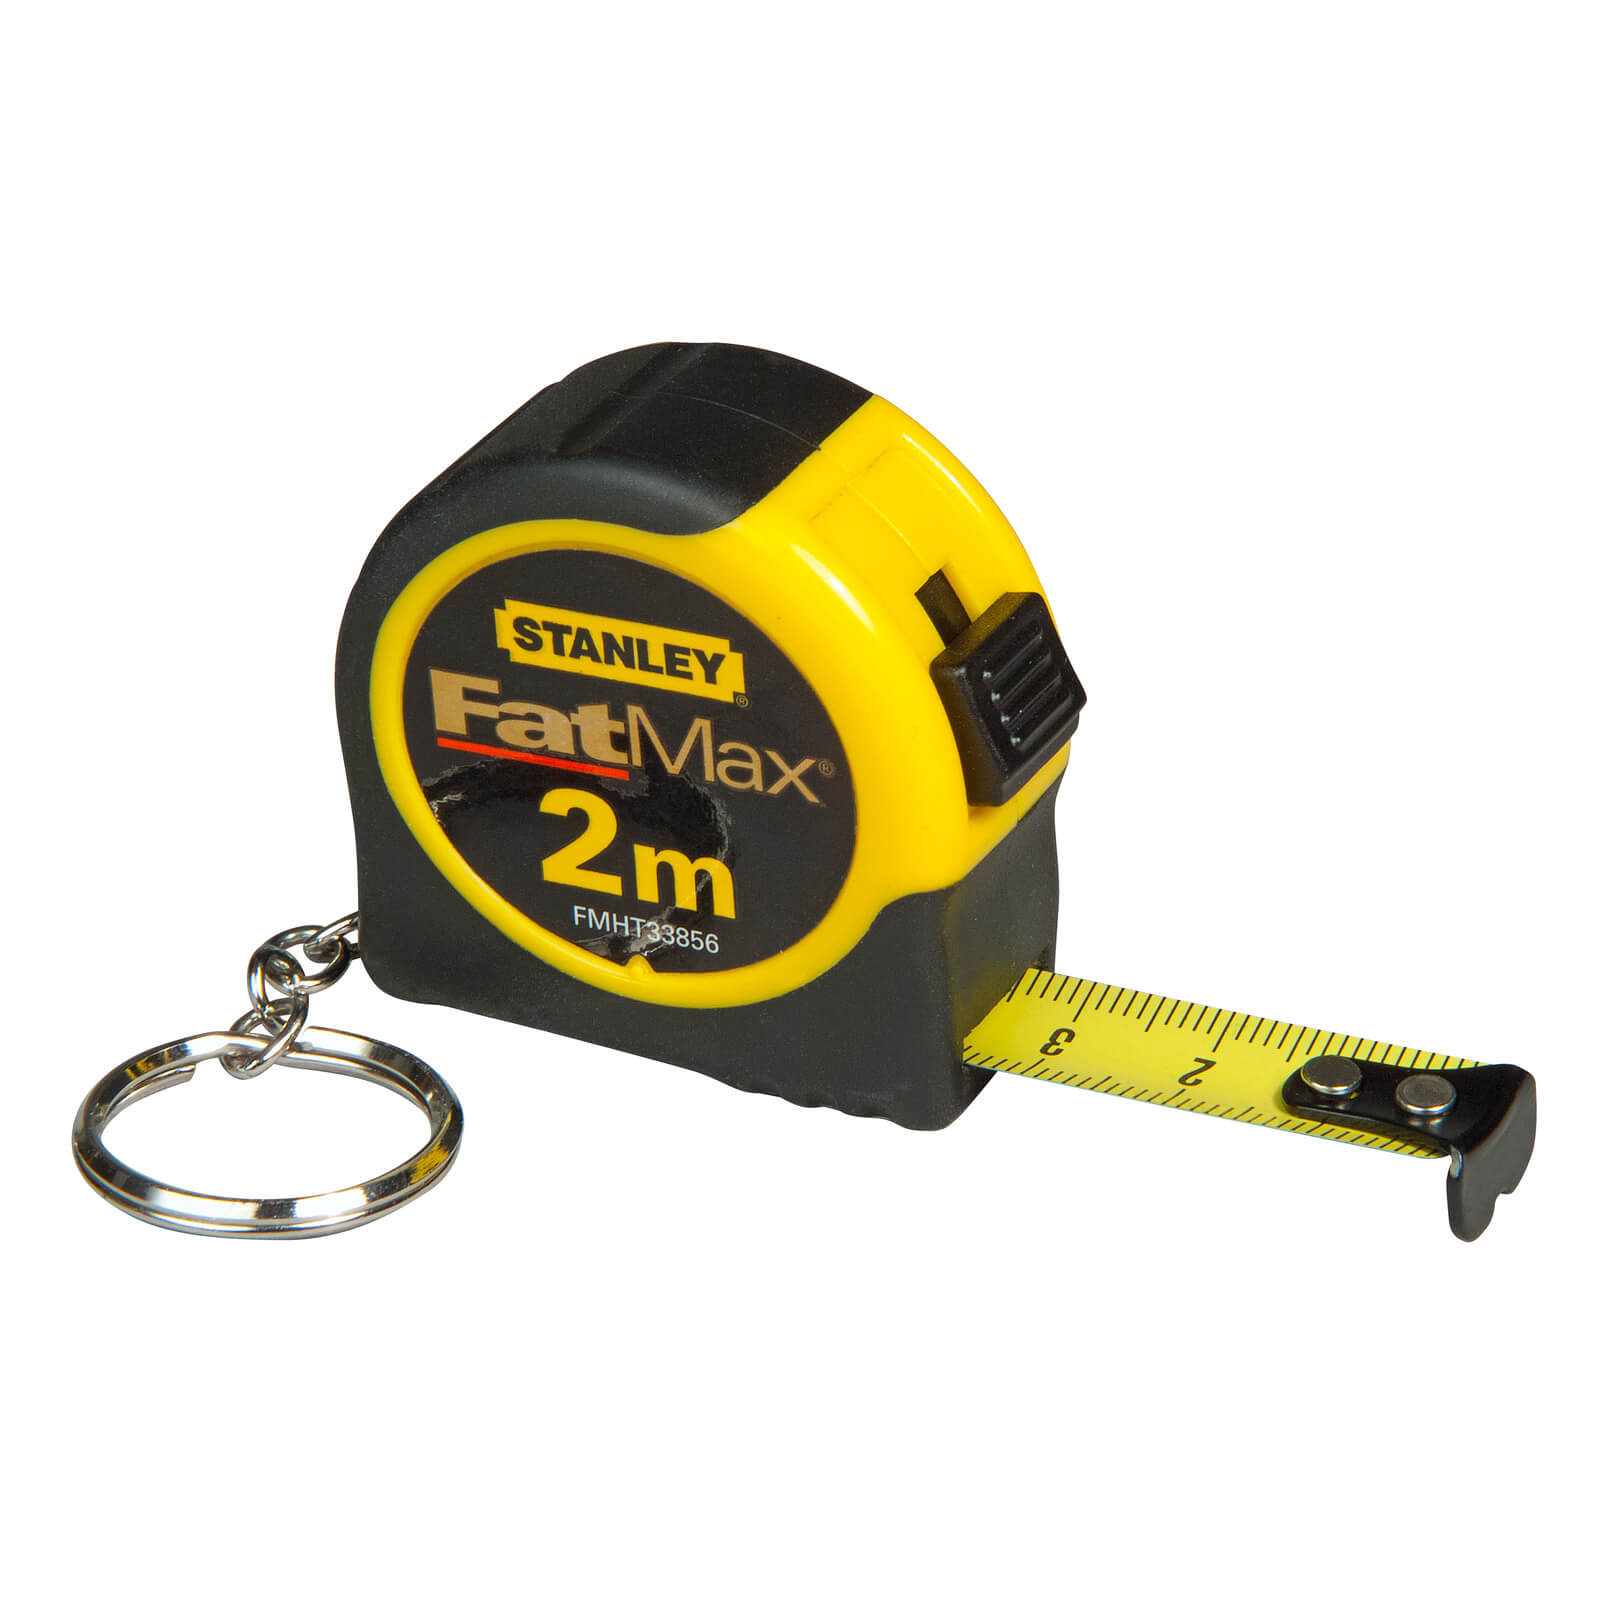 Photo of Stanley Fatmax 2m Keychain Tape